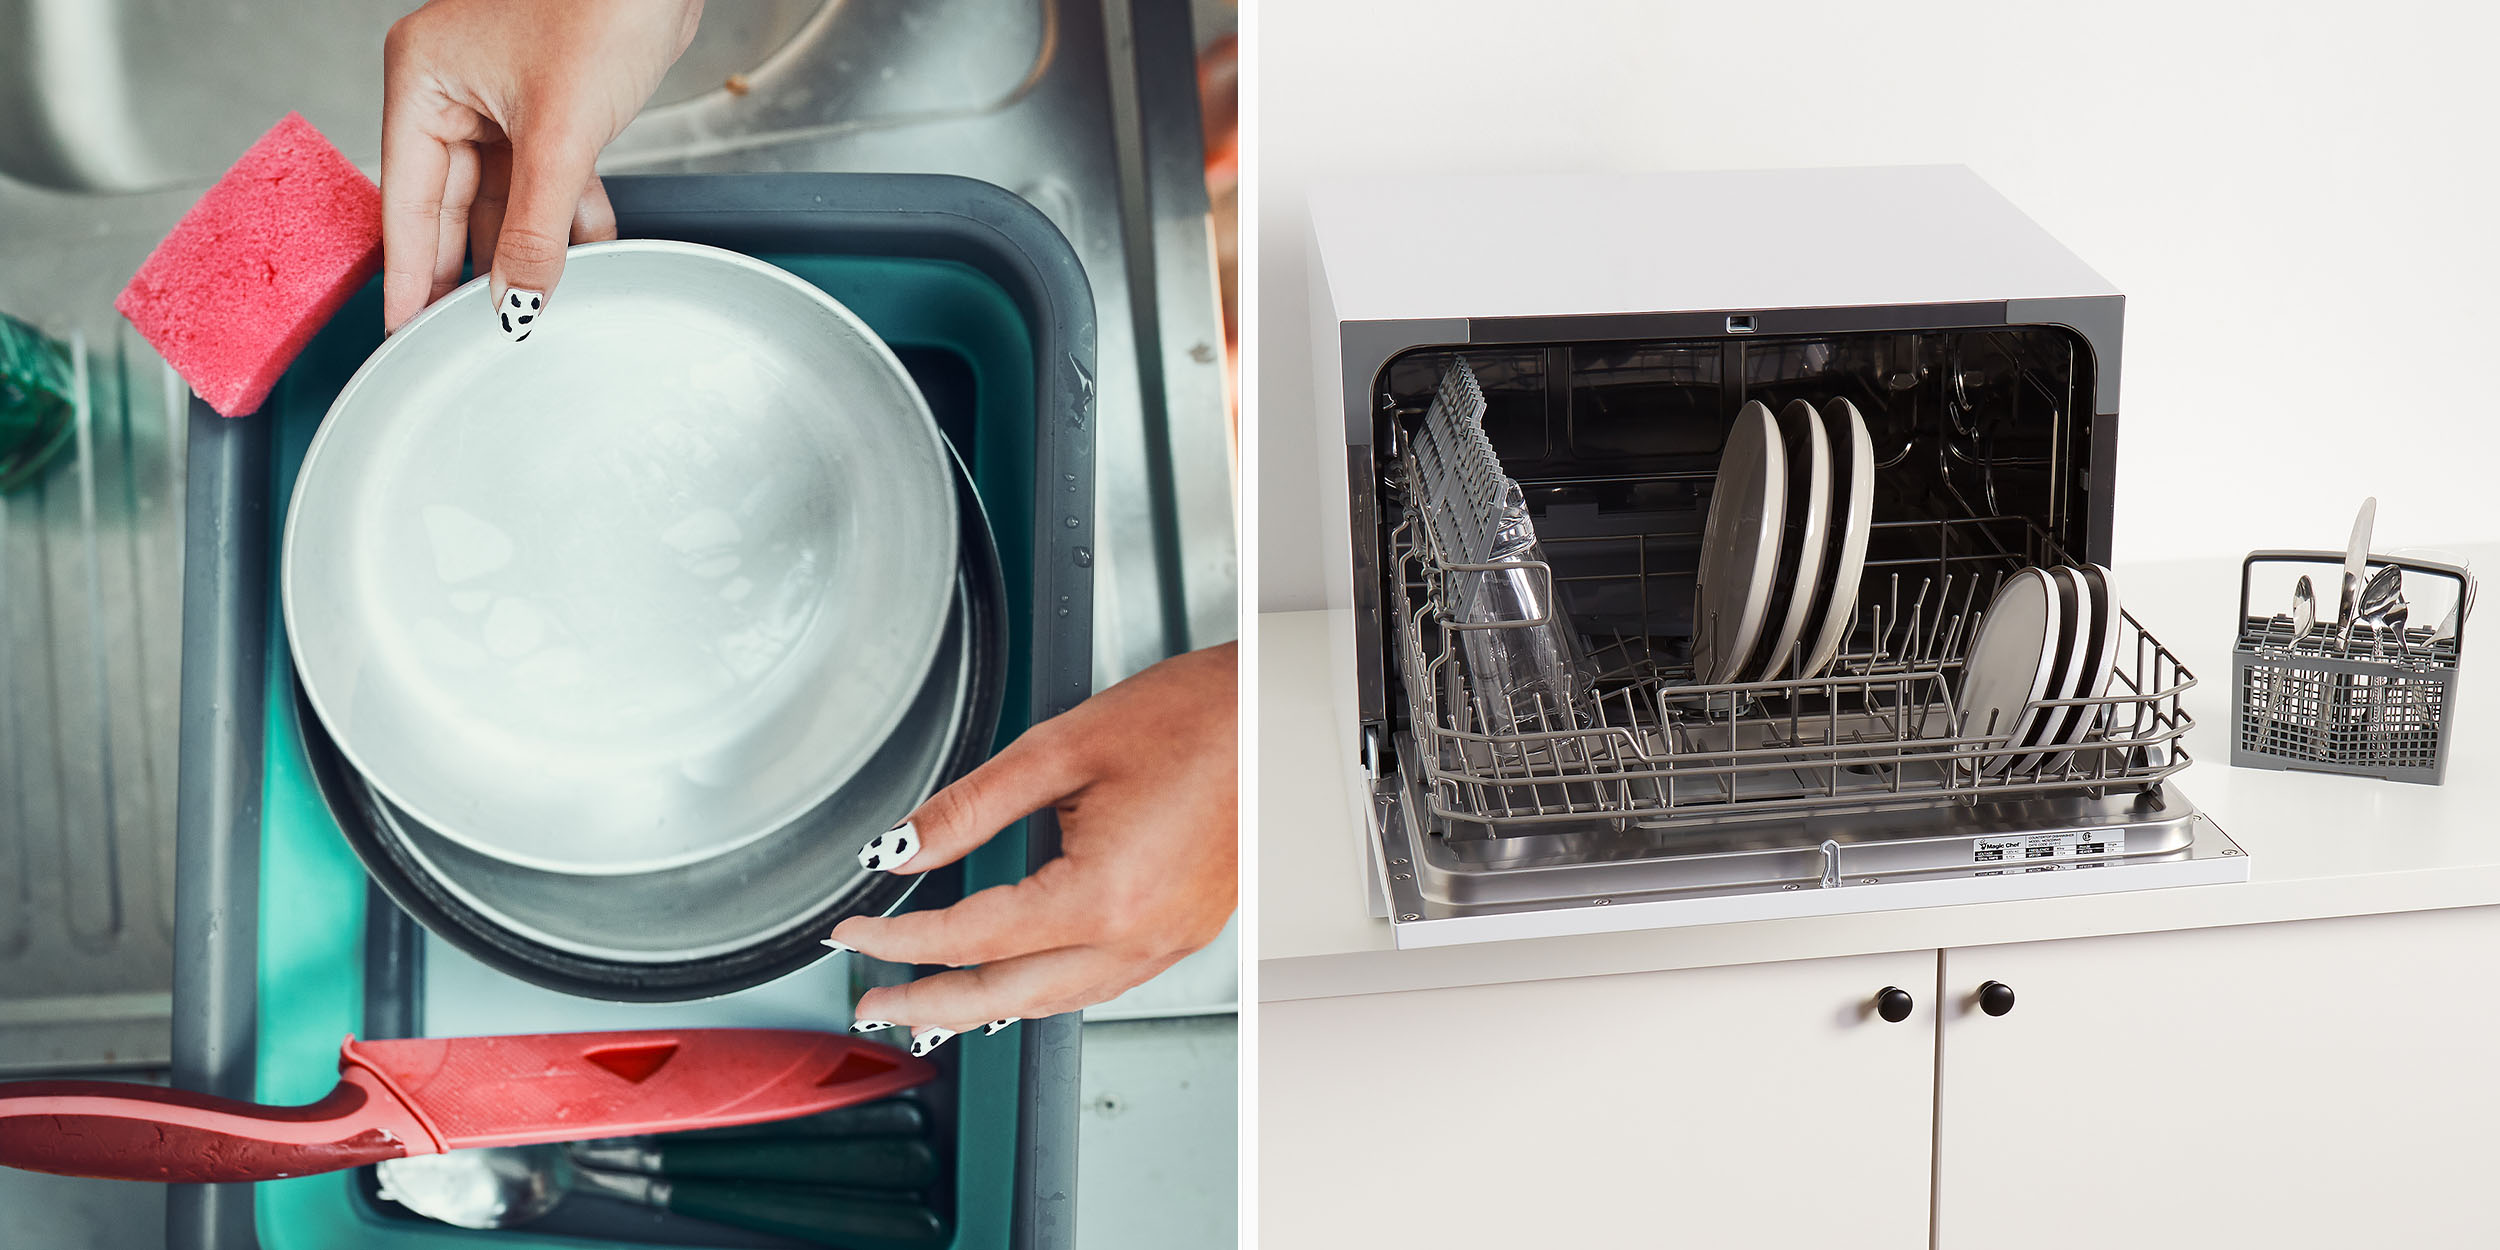 What should I look for in a countertop dishwasher?